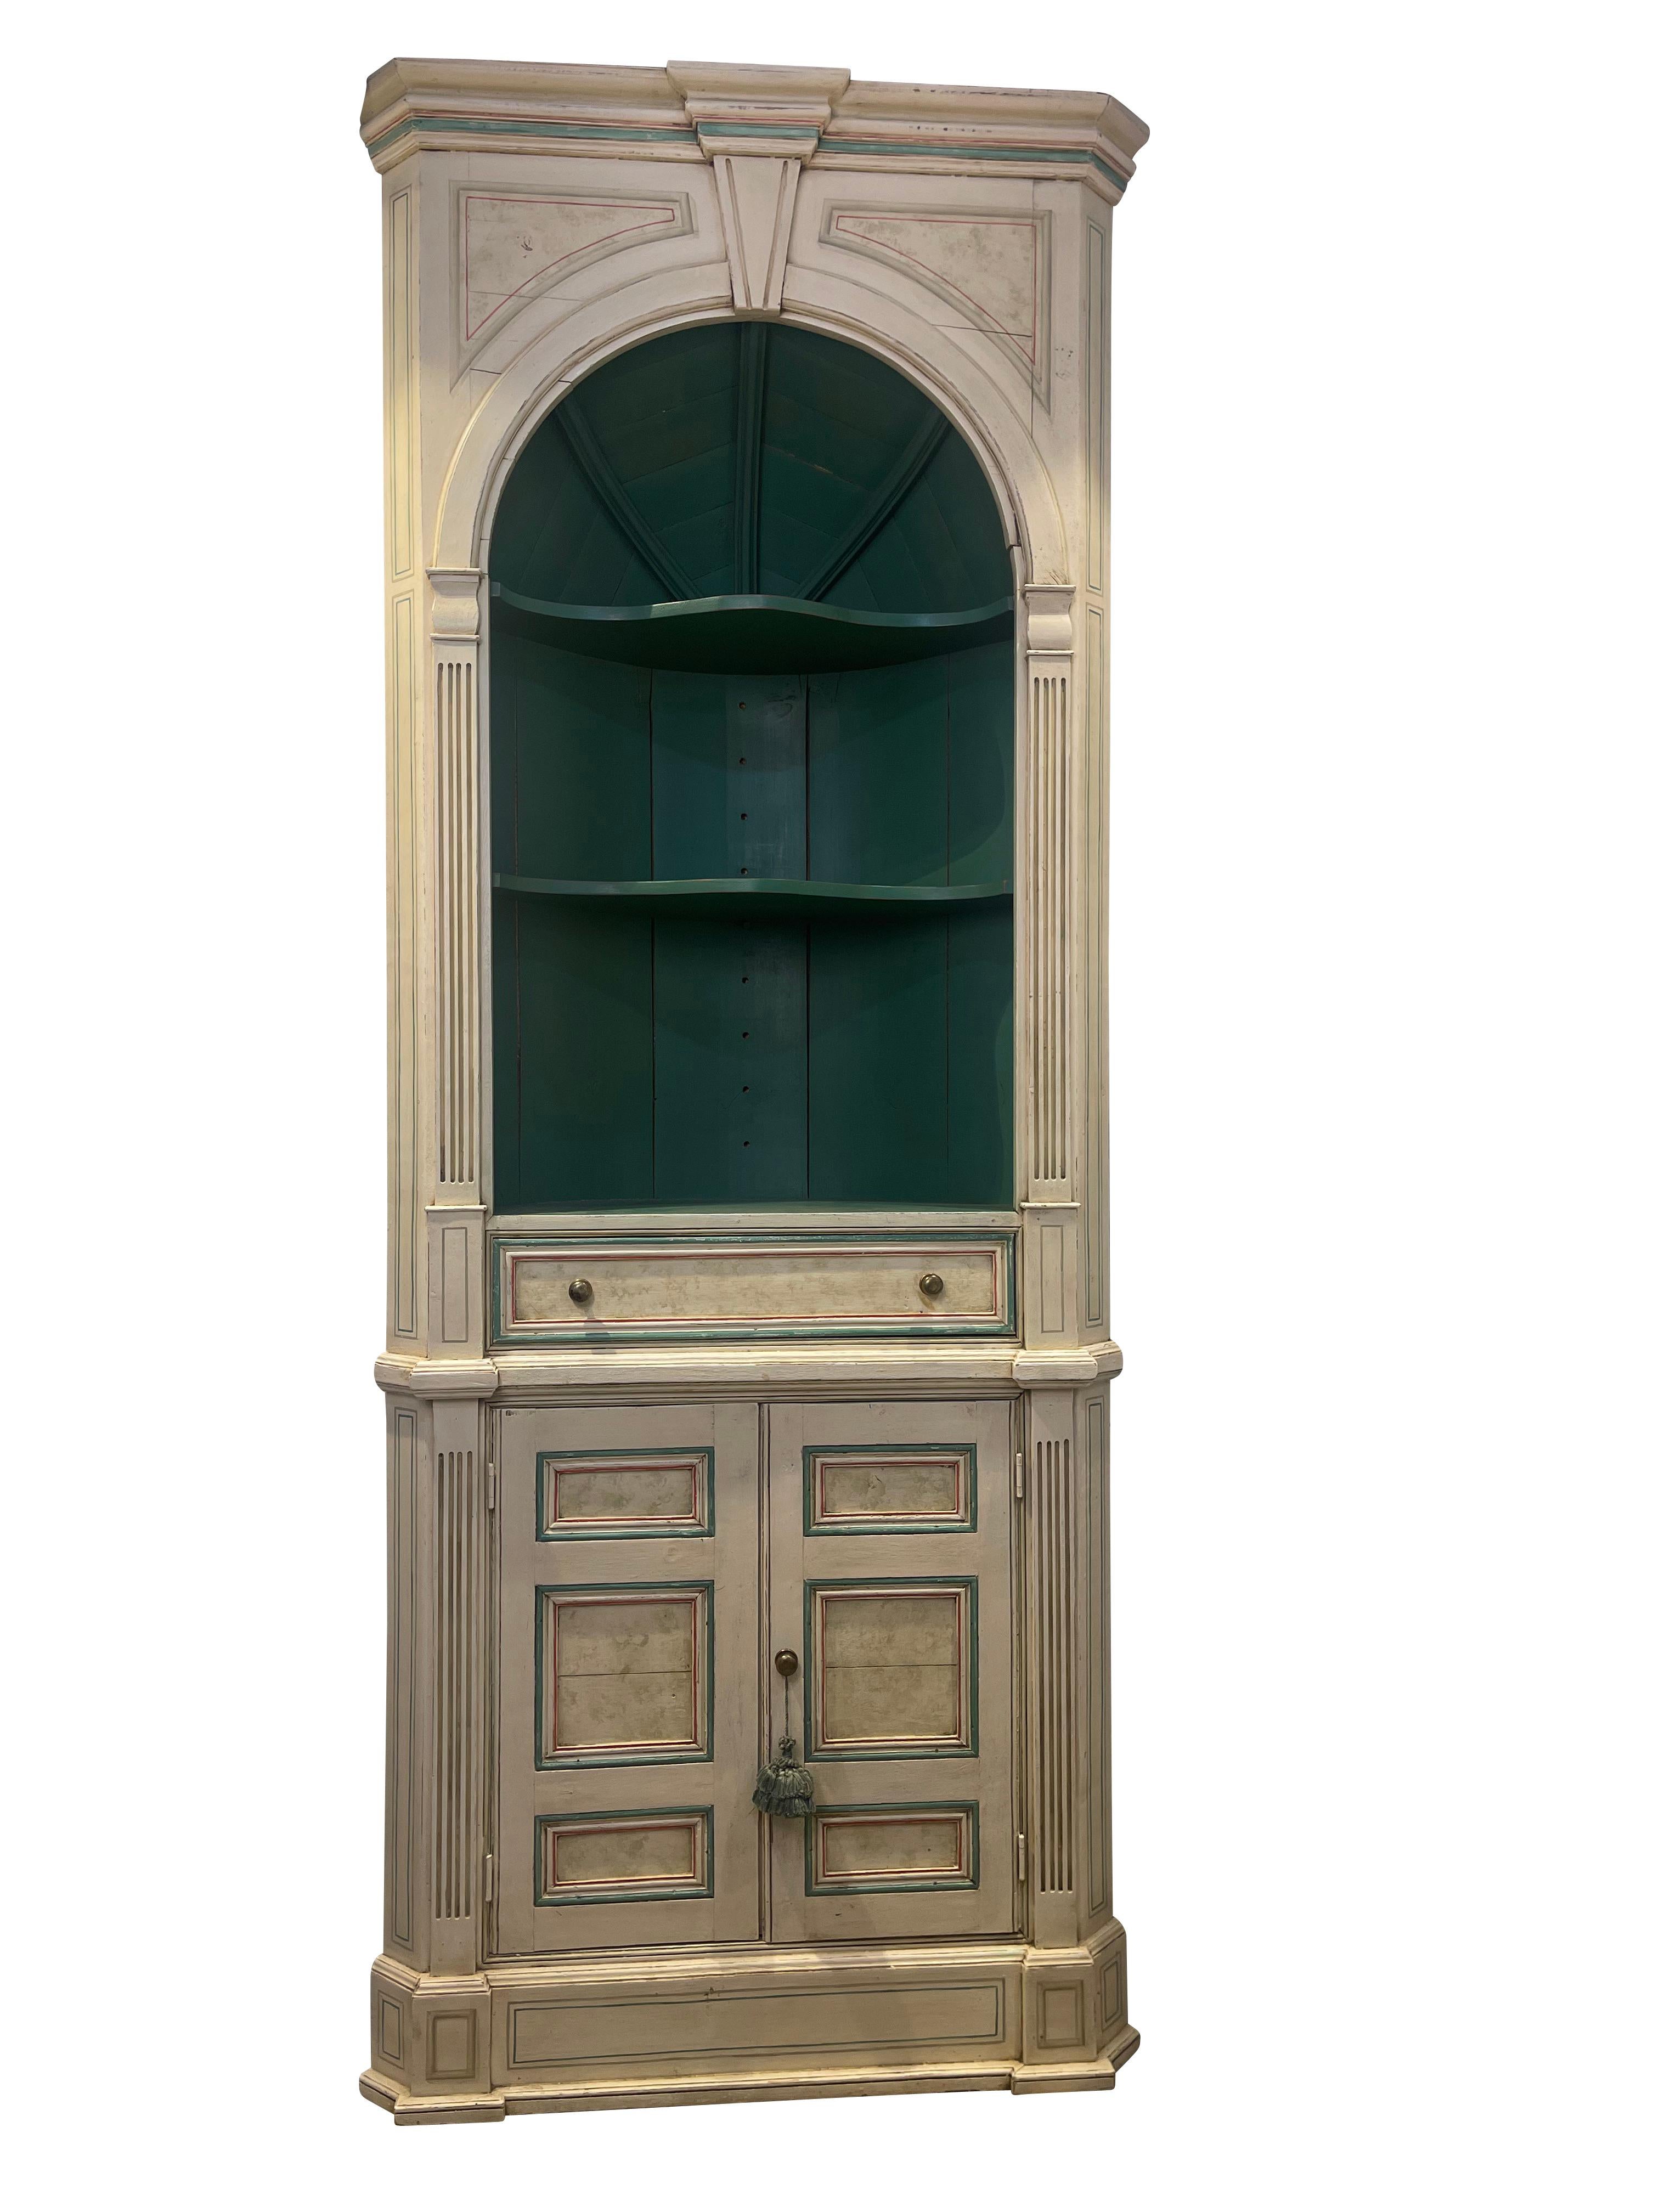 20th century neoclassical painted corner cabinet ~ bookcase that has a splendid European feel. The mitered corners project the piece out into the room, yet its impact on the floor plan is minimal due to utilizing otherwise unused corner space.